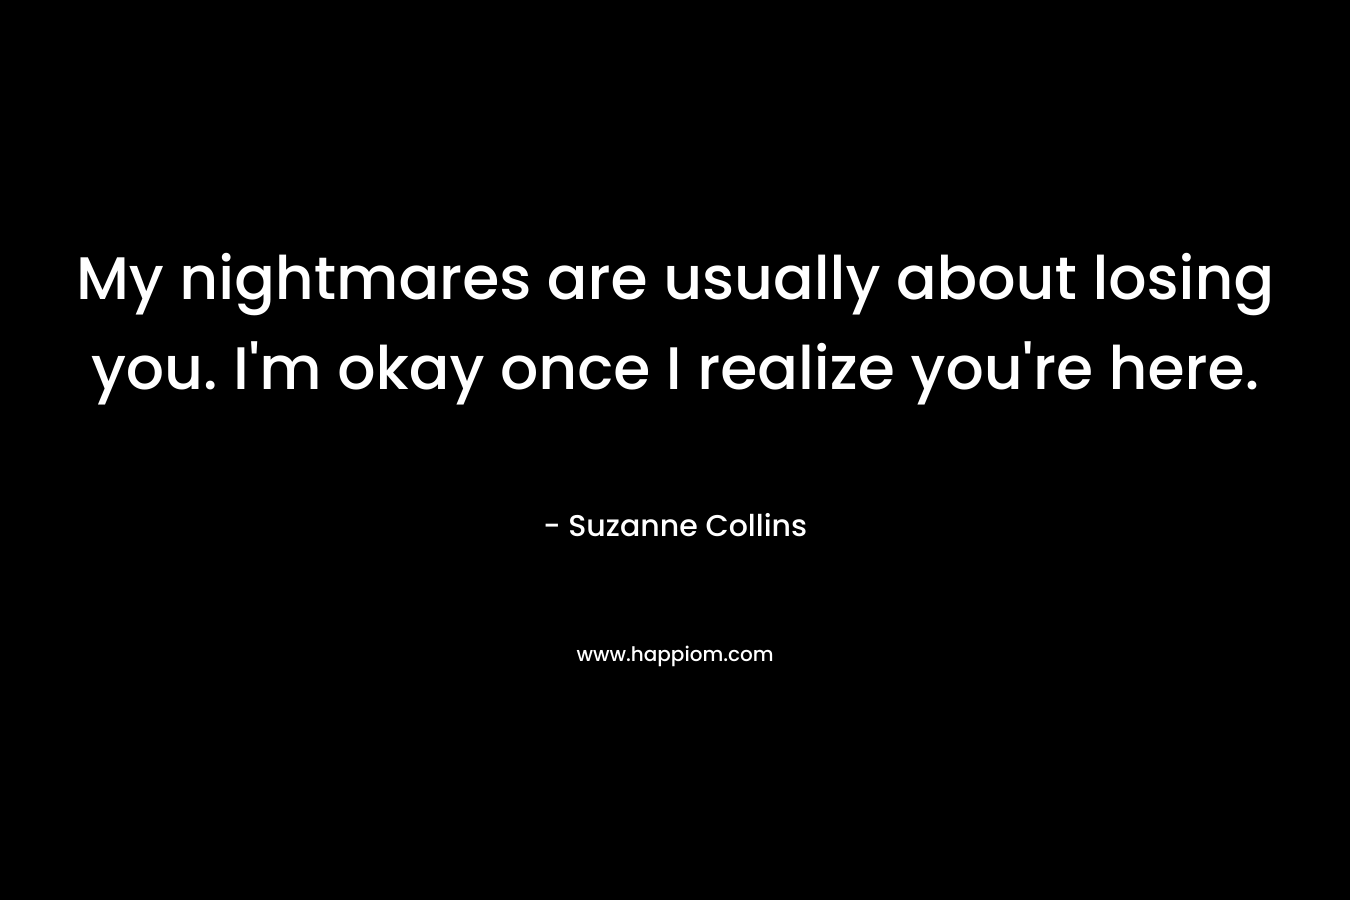 My nightmares are usually about losing you. I’m okay once I realize you’re here. – Suzanne Collins